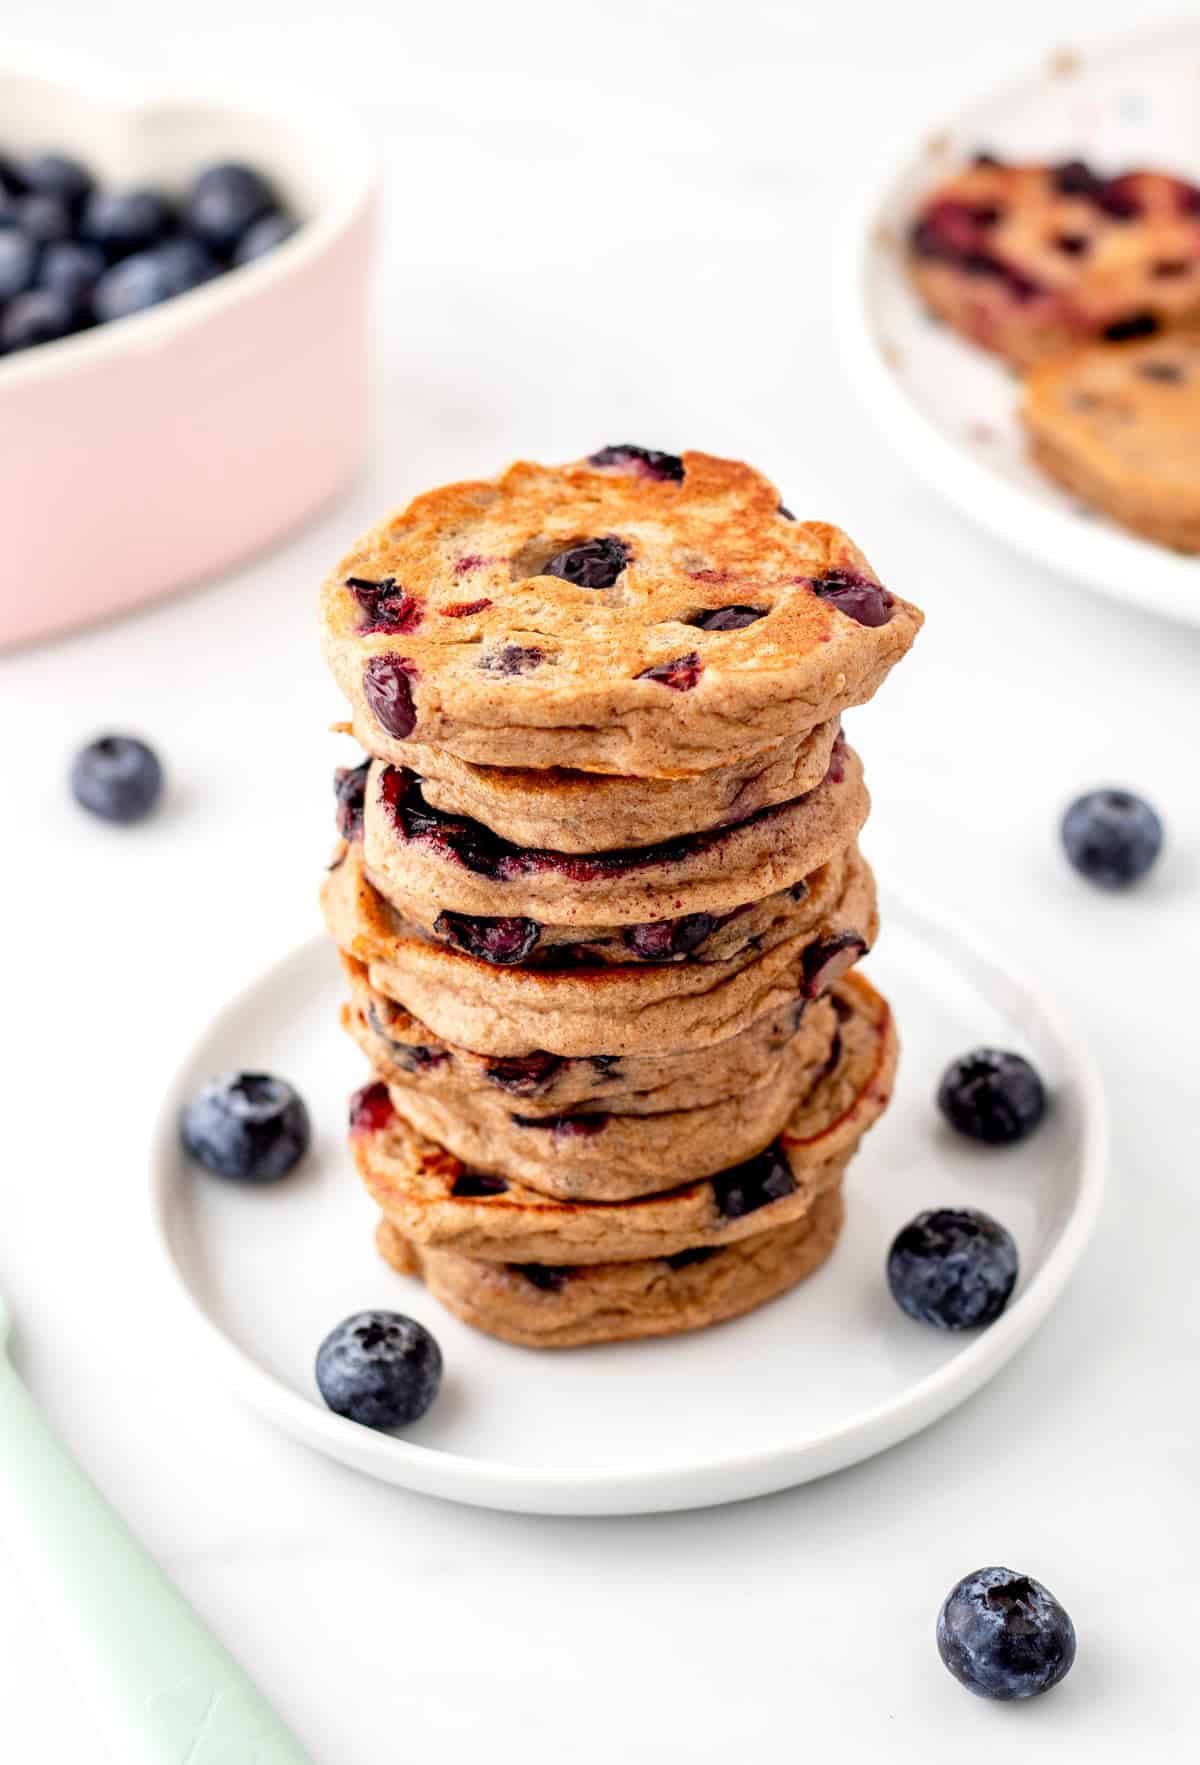 A stack of baby blueberry pancakes on a white plate.